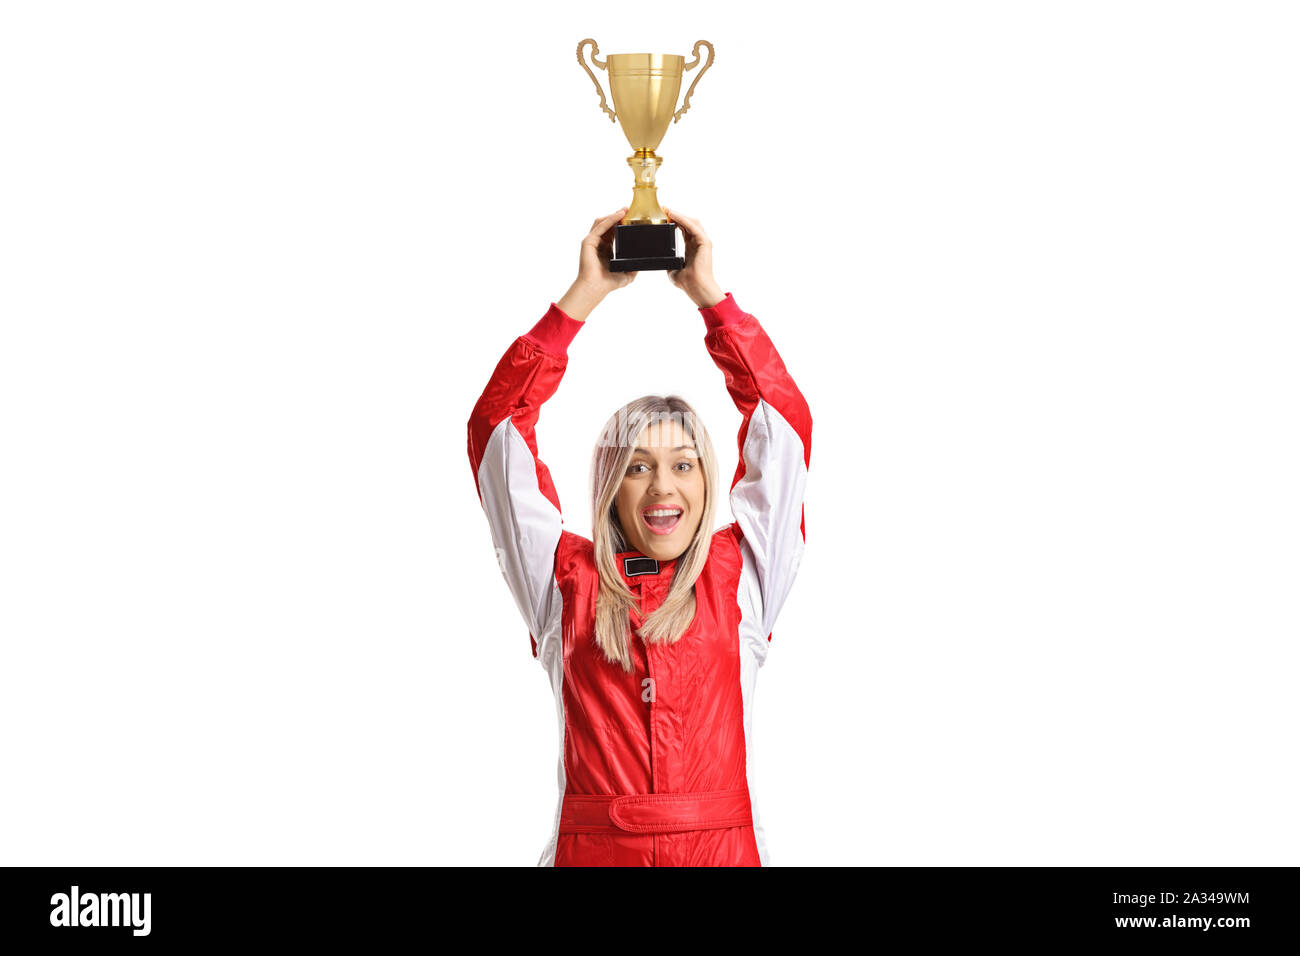 Happy female racer holding a golden trophy cup isolated on white background Stock Photo